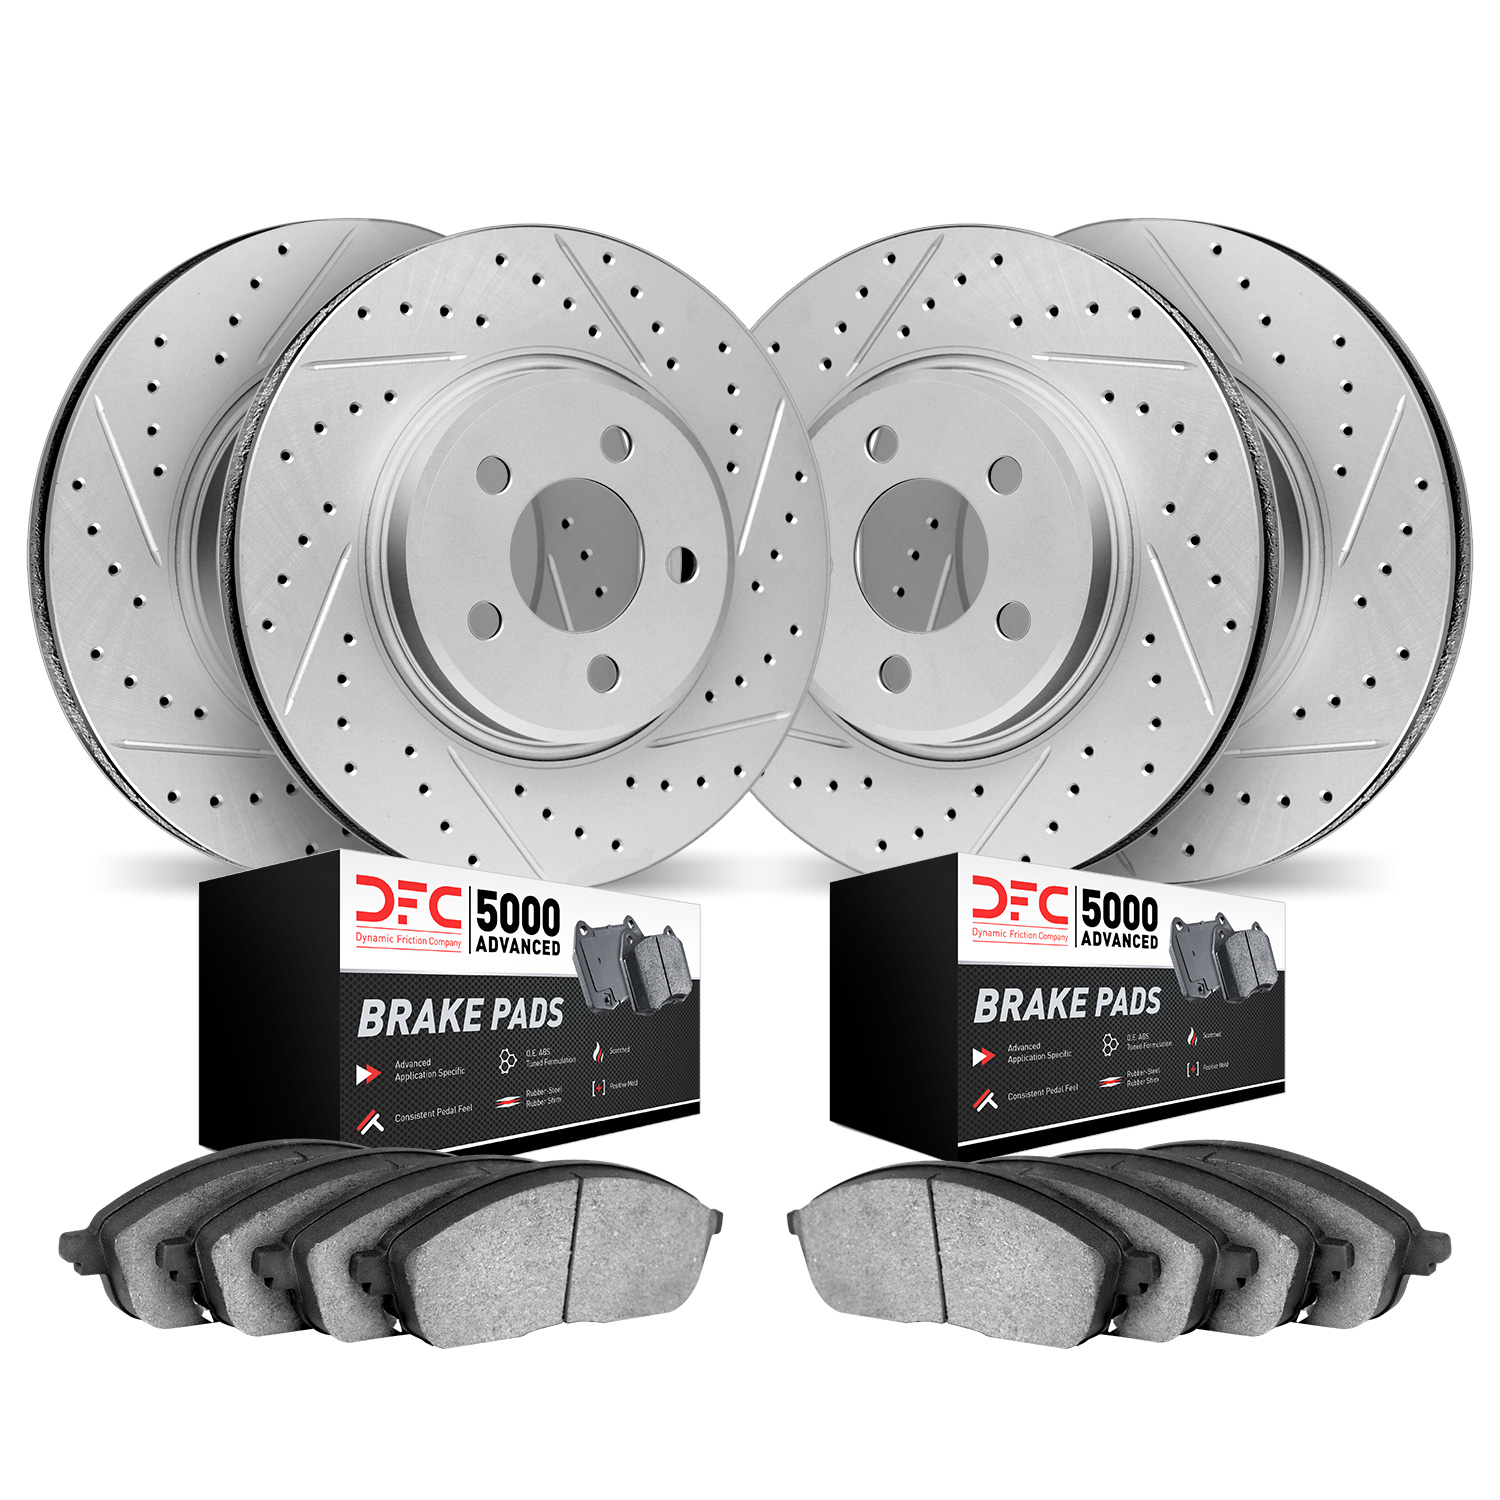 2504-02008 Geoperformance Drilled/Slotted Rotors w/5000 Advanced Brake Pads Kit, 2008-2008 Porsche, Position: Front and Rear